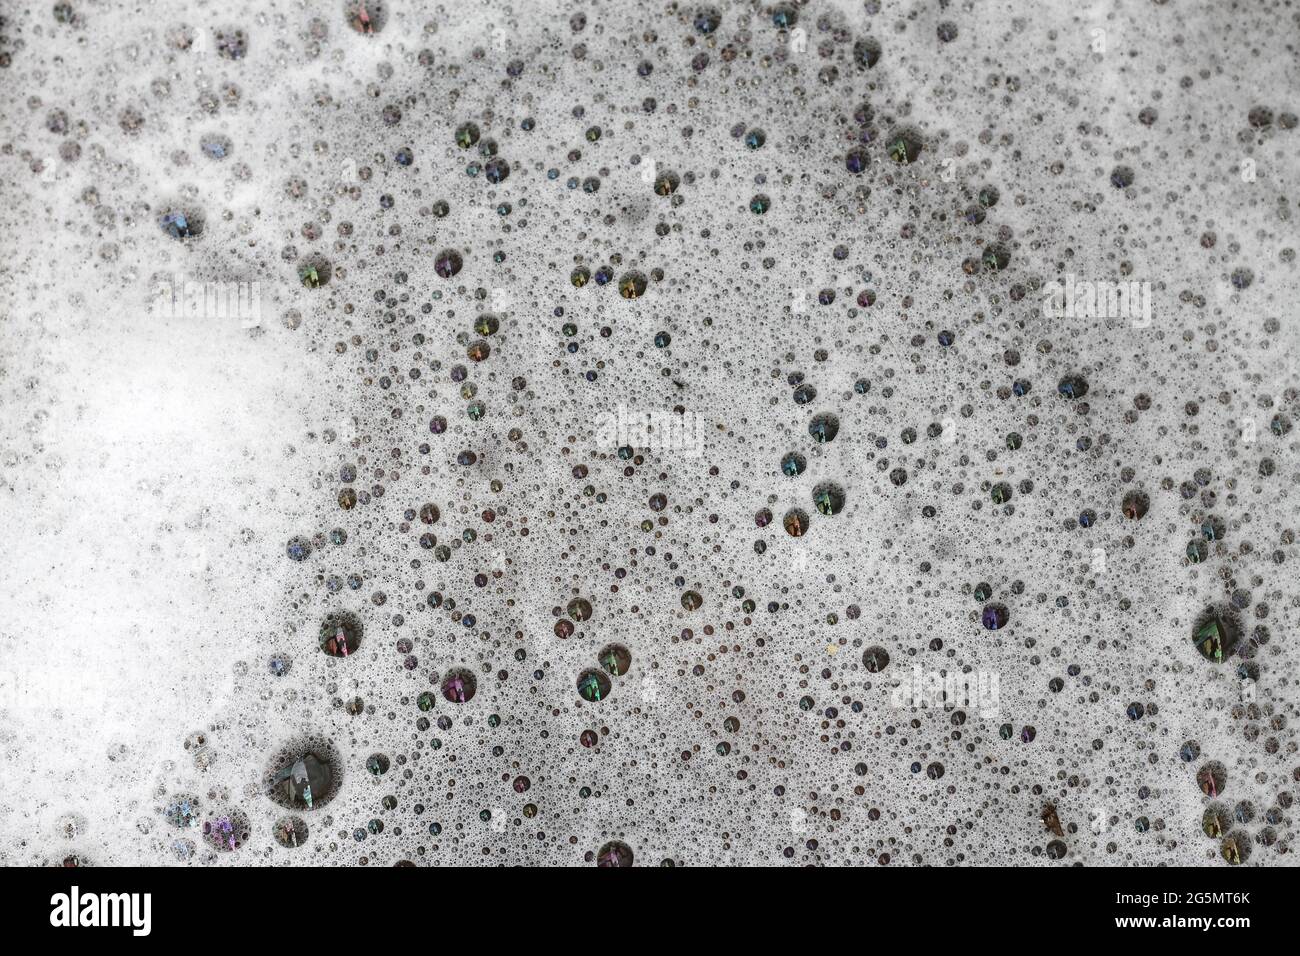 Detergent bubbles float in the waste water. Stock Photo